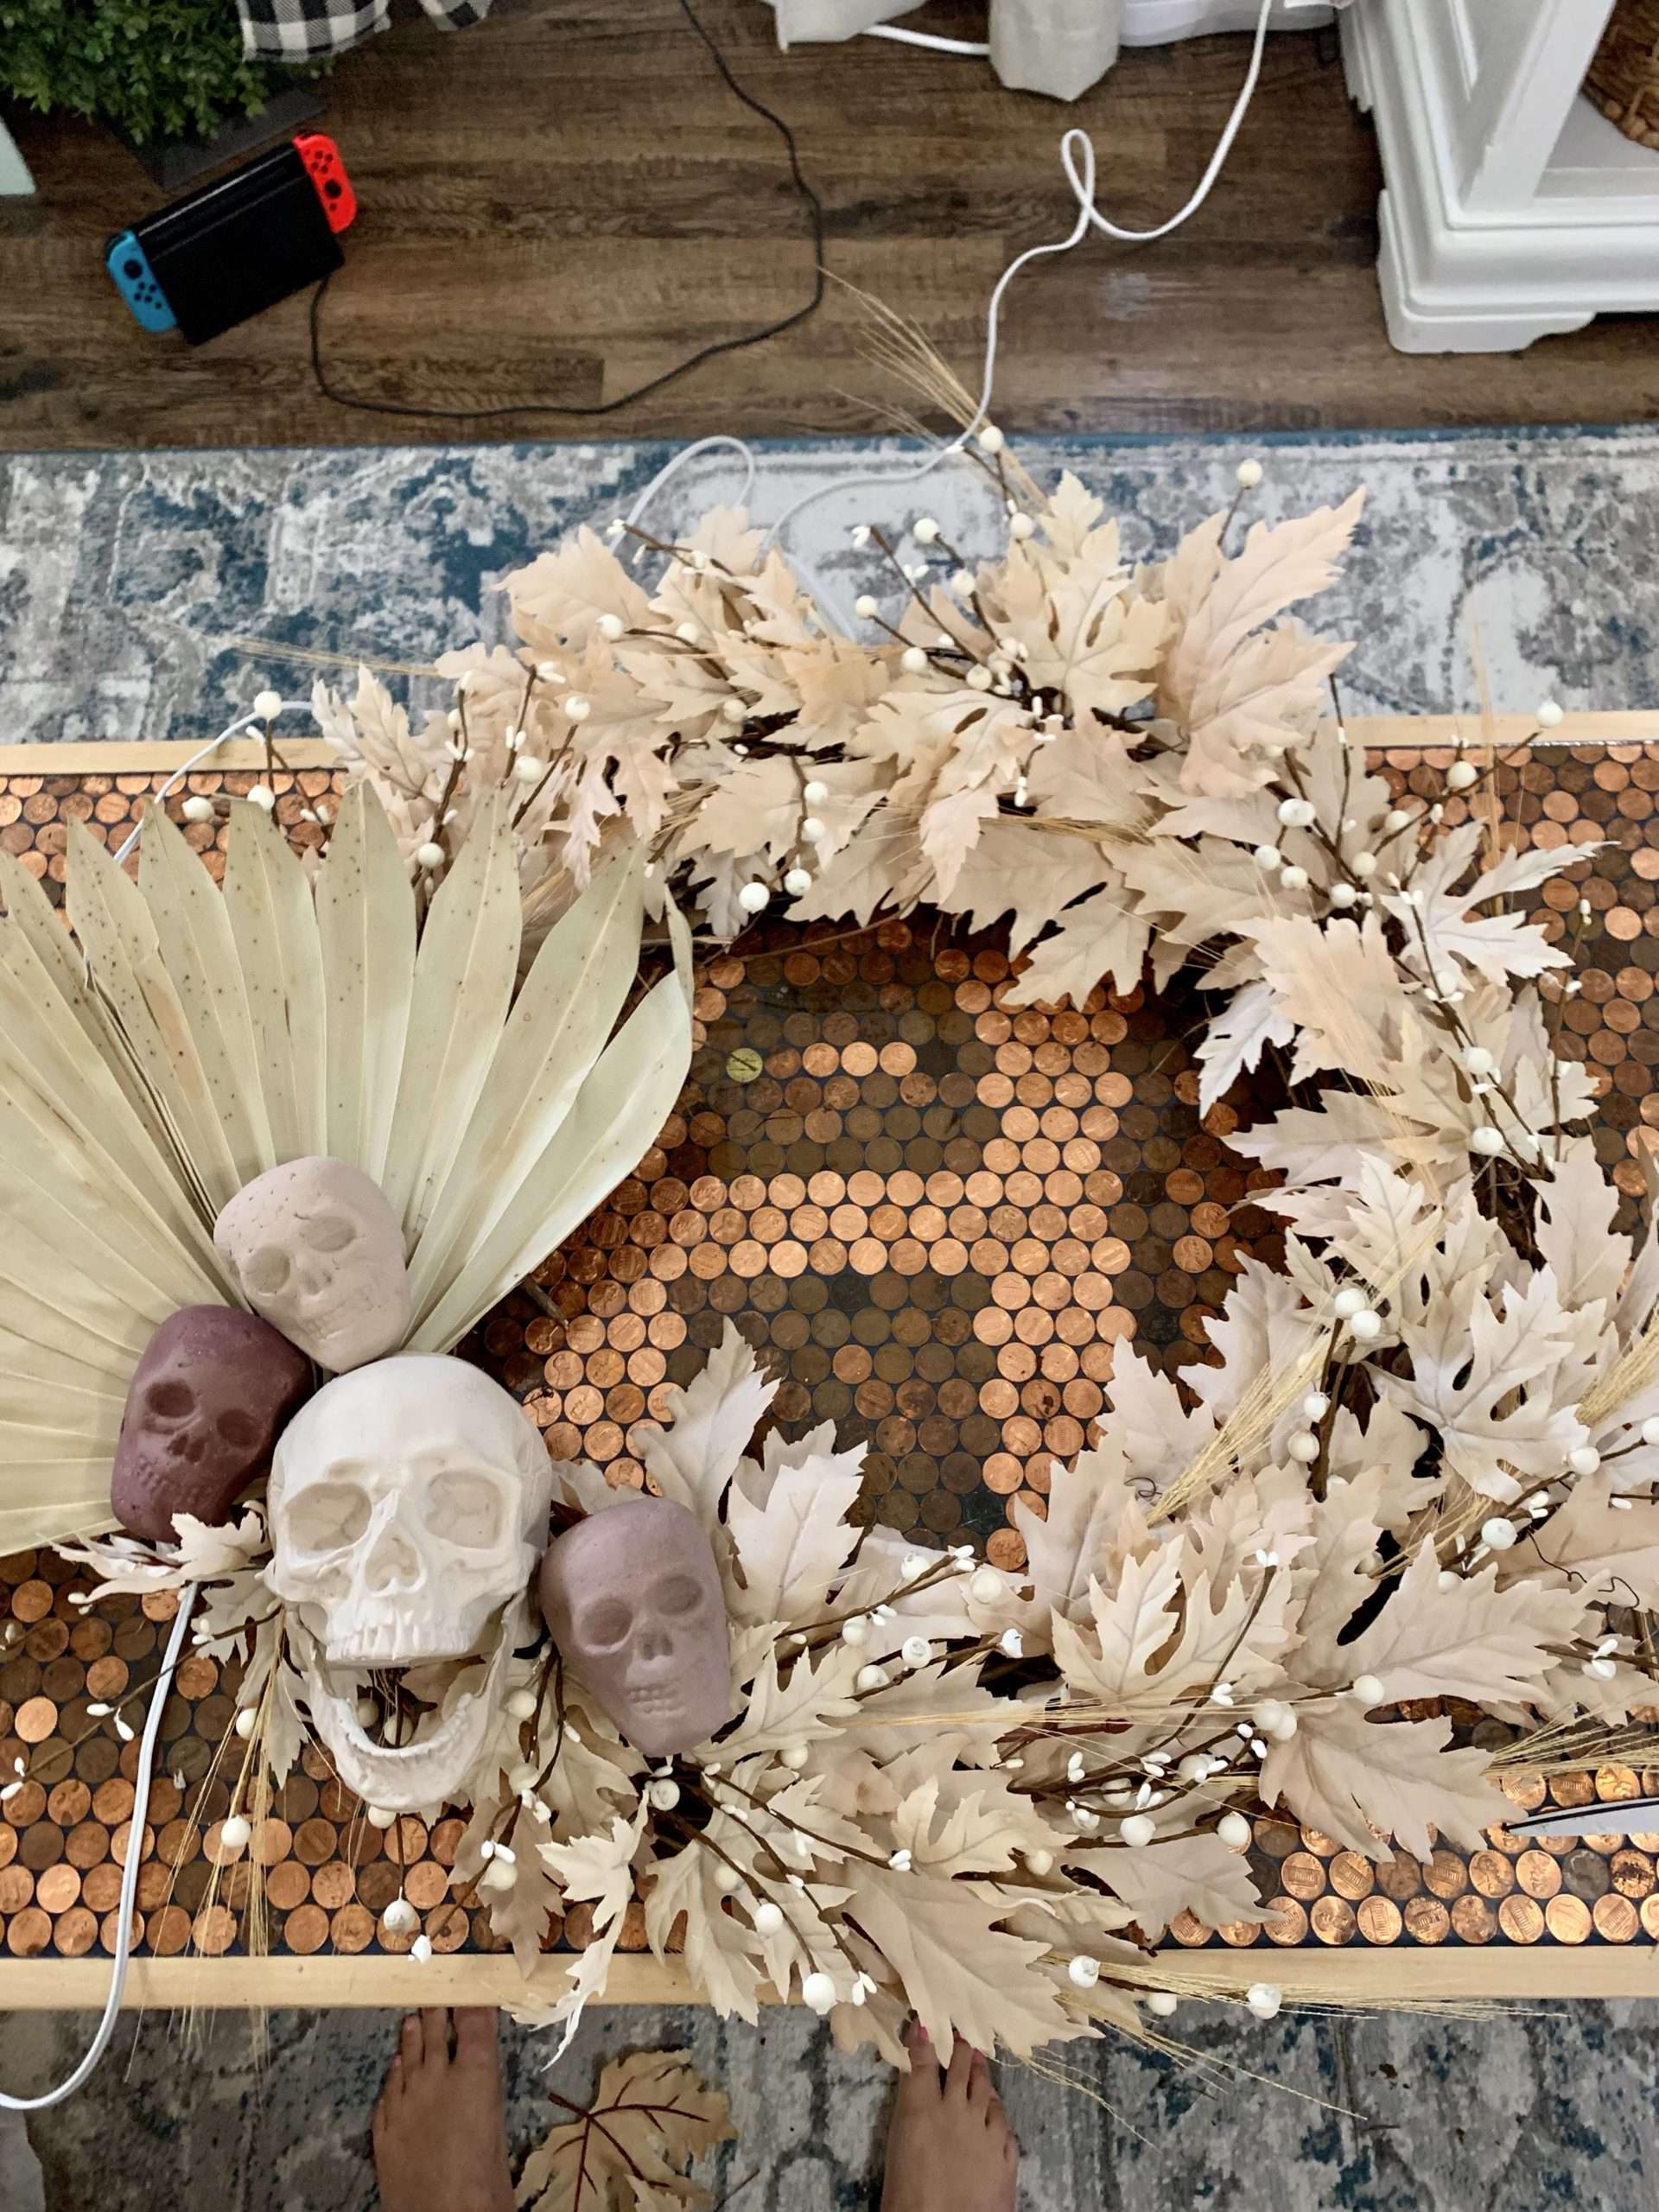 After adding leaves, berries, and grass to the boho Halloween wreath.